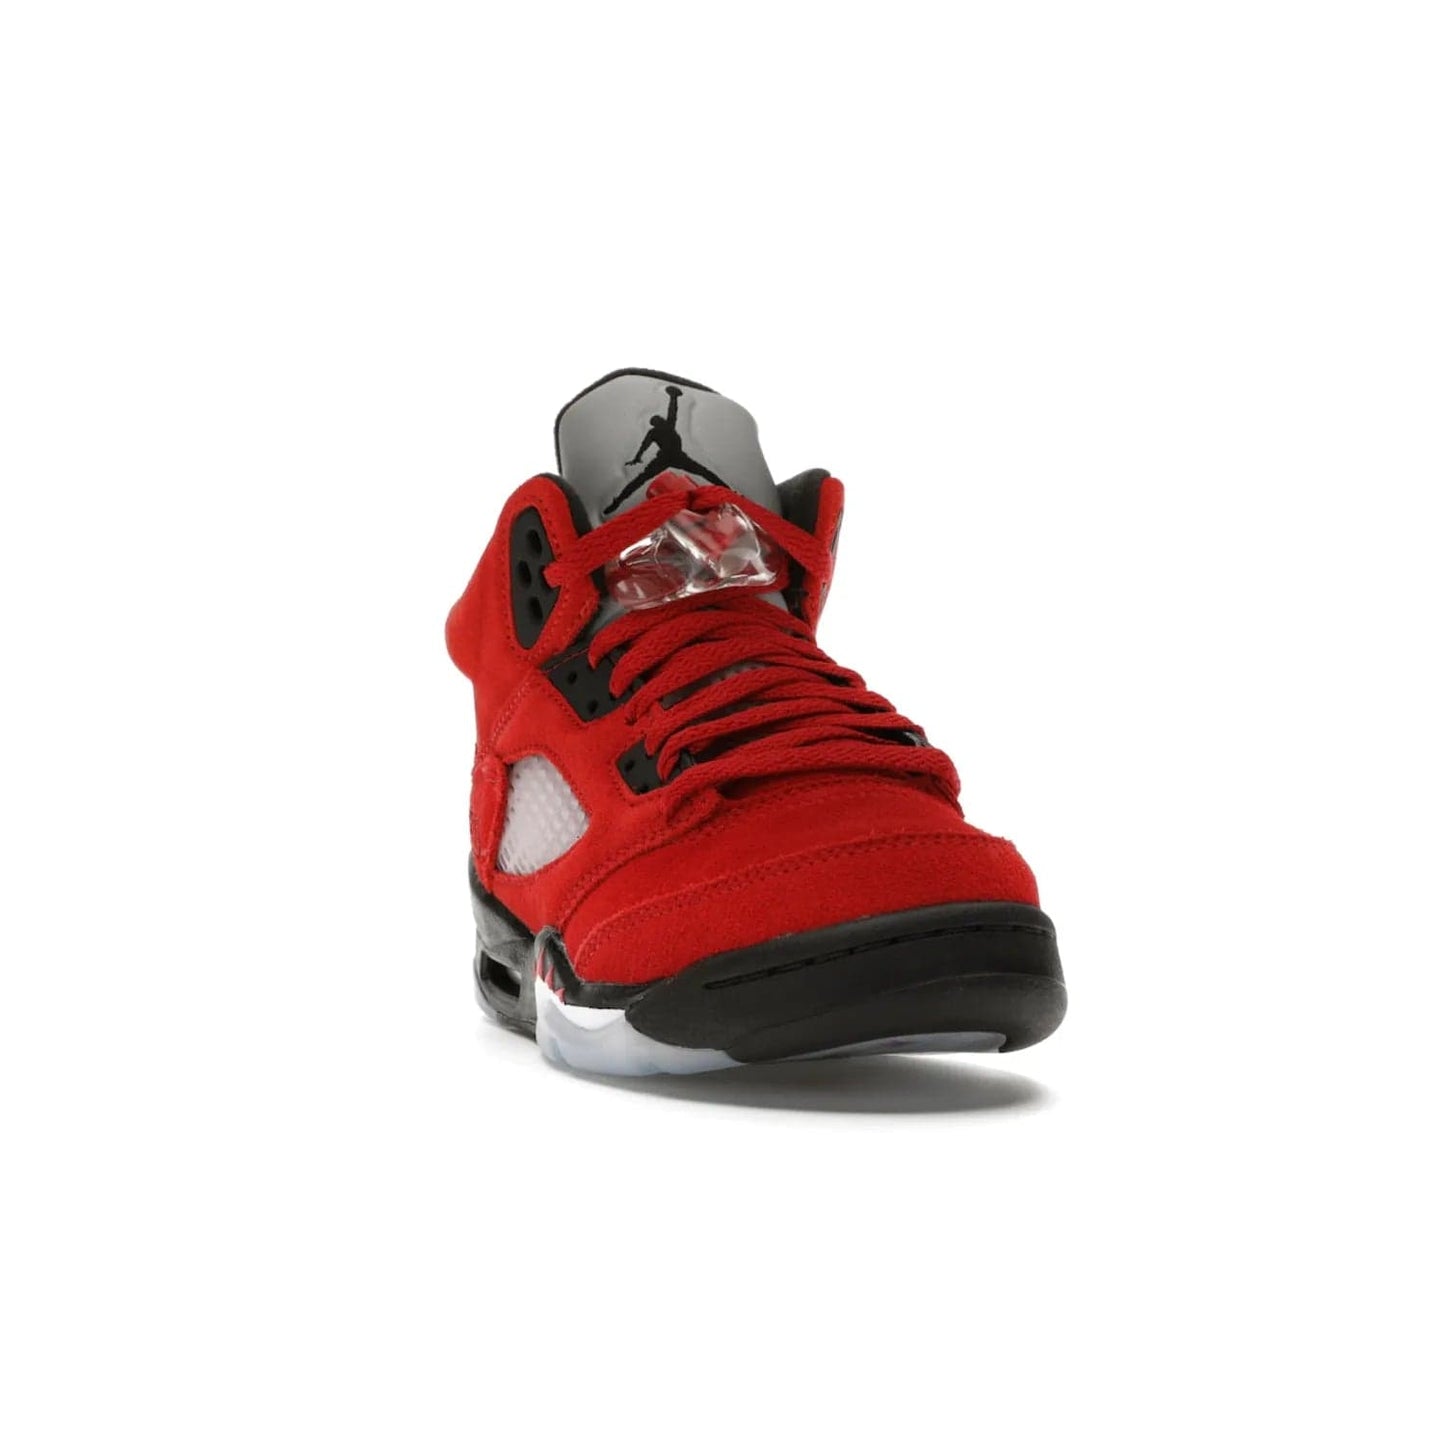 Jordan 5 Retro Raging Bull Red (2021) (GS) - Image 8 - Only at www.BallersClubKickz.com - Jordan 5 Retro Raging Bulls Red 2021 GS. Varsity Red suede upper with embroidered number 23, black leather detail, red laces, and midsole with air cushioning. Jumpman logos on tongue, heel, and outsole. On-trend streetwear and basketball style. Released April 10, 2021.